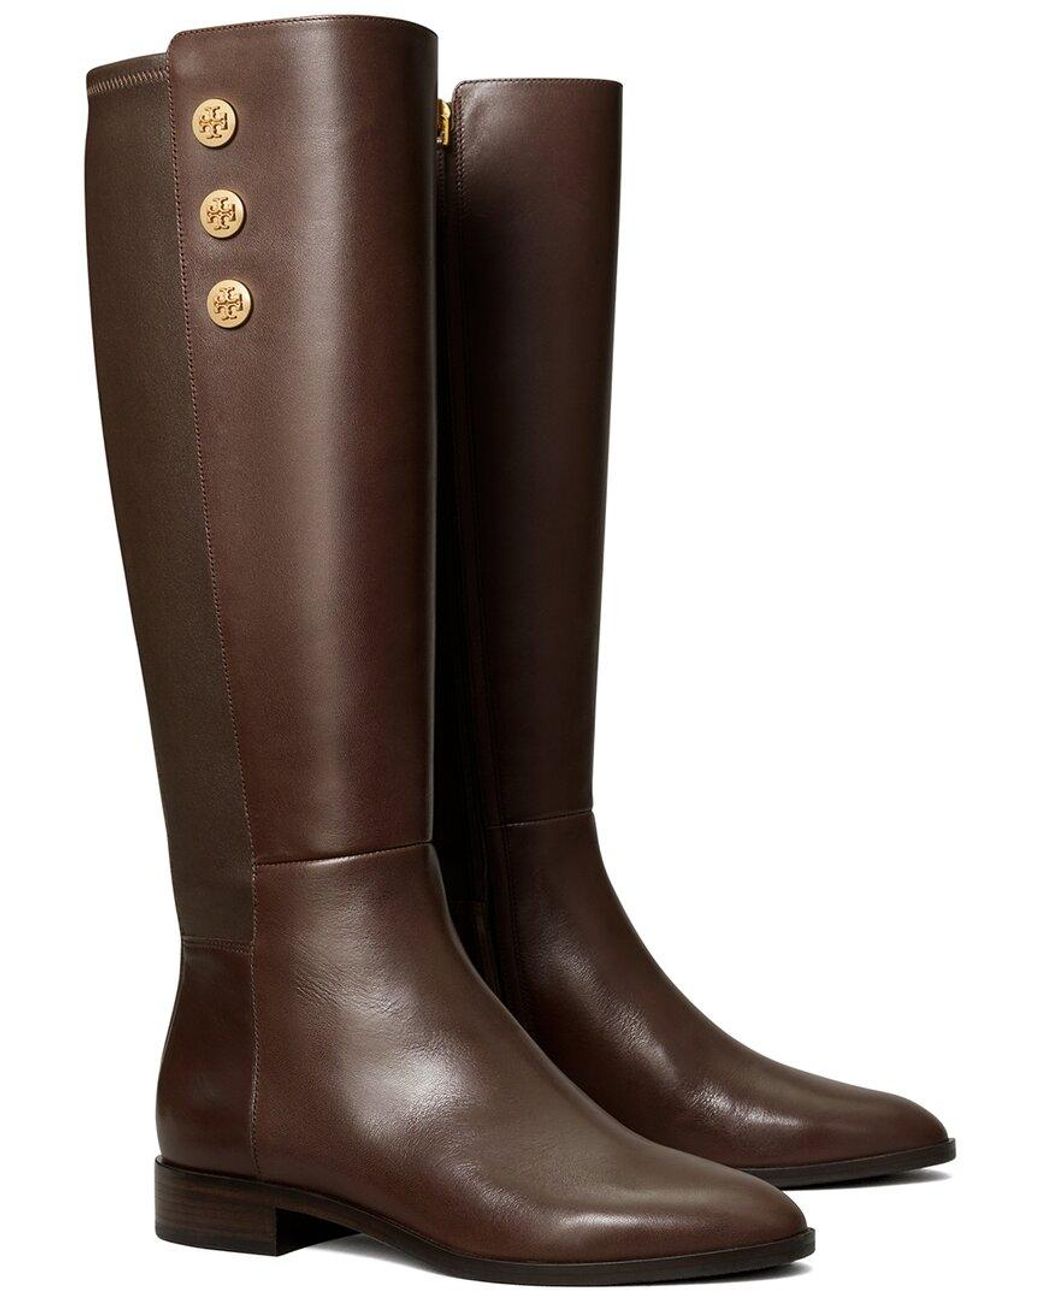 Tory Burch Naomi 25 Leather Tall Boot in Brown | Lyst